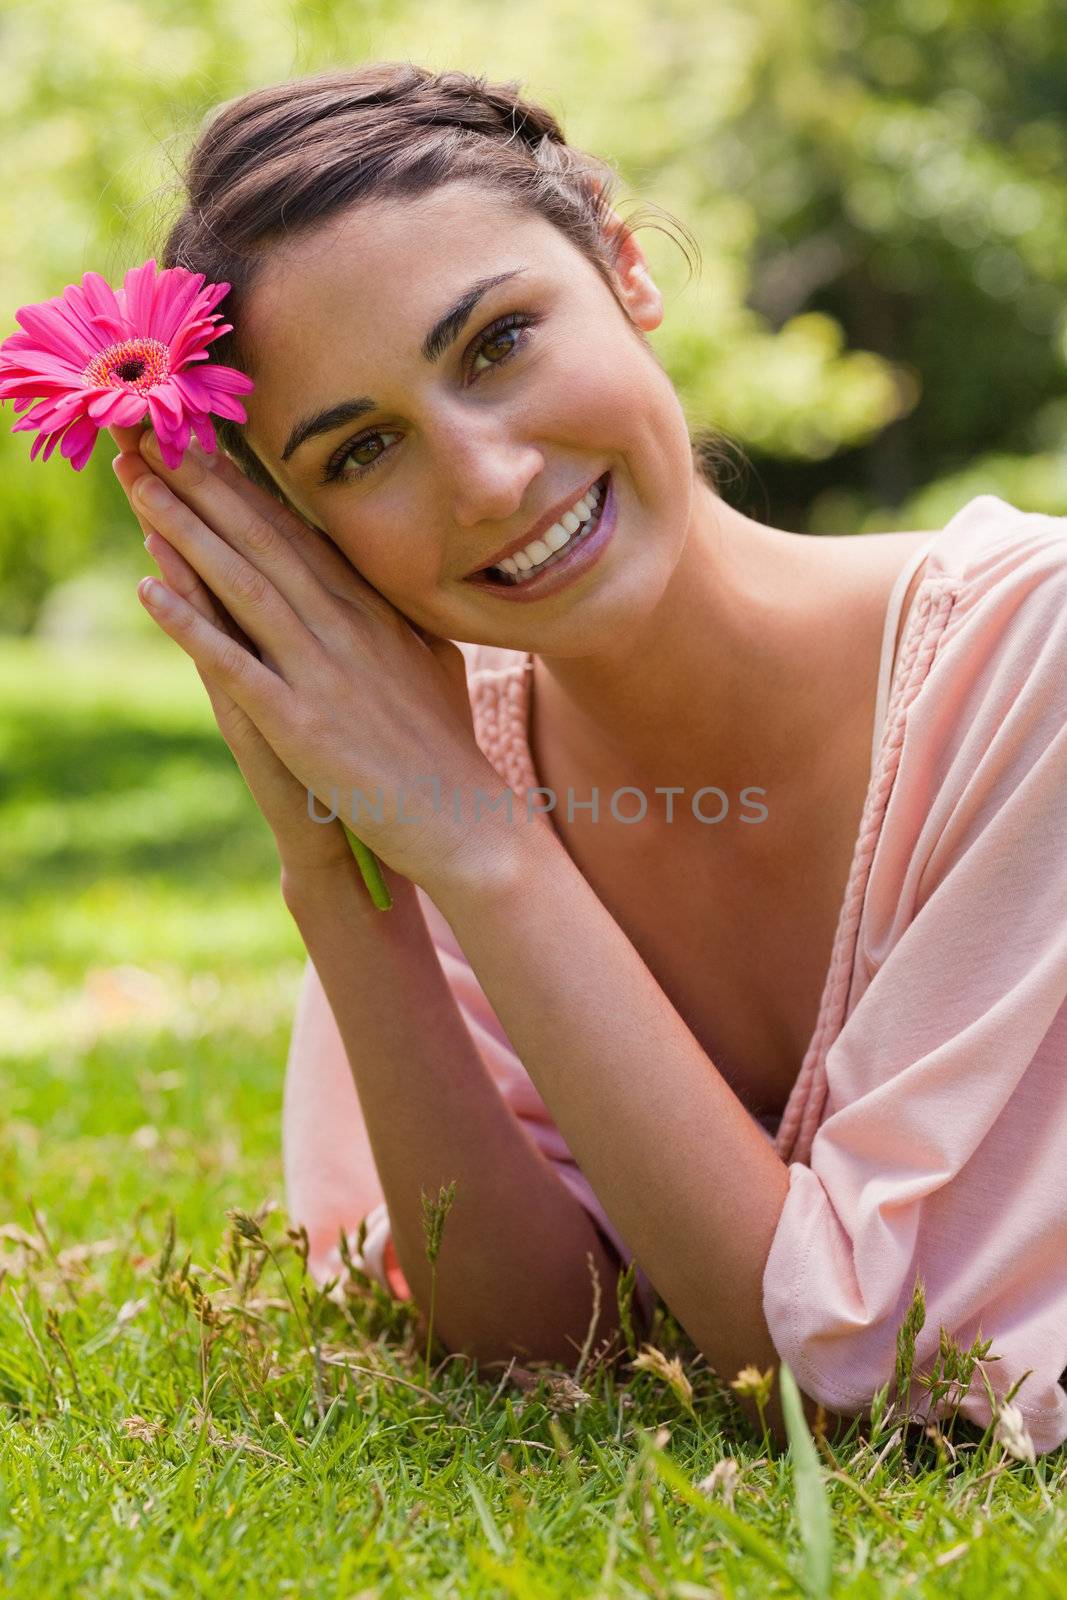 Woman restling her head against her arms while holding a flower by Wavebreakmedia